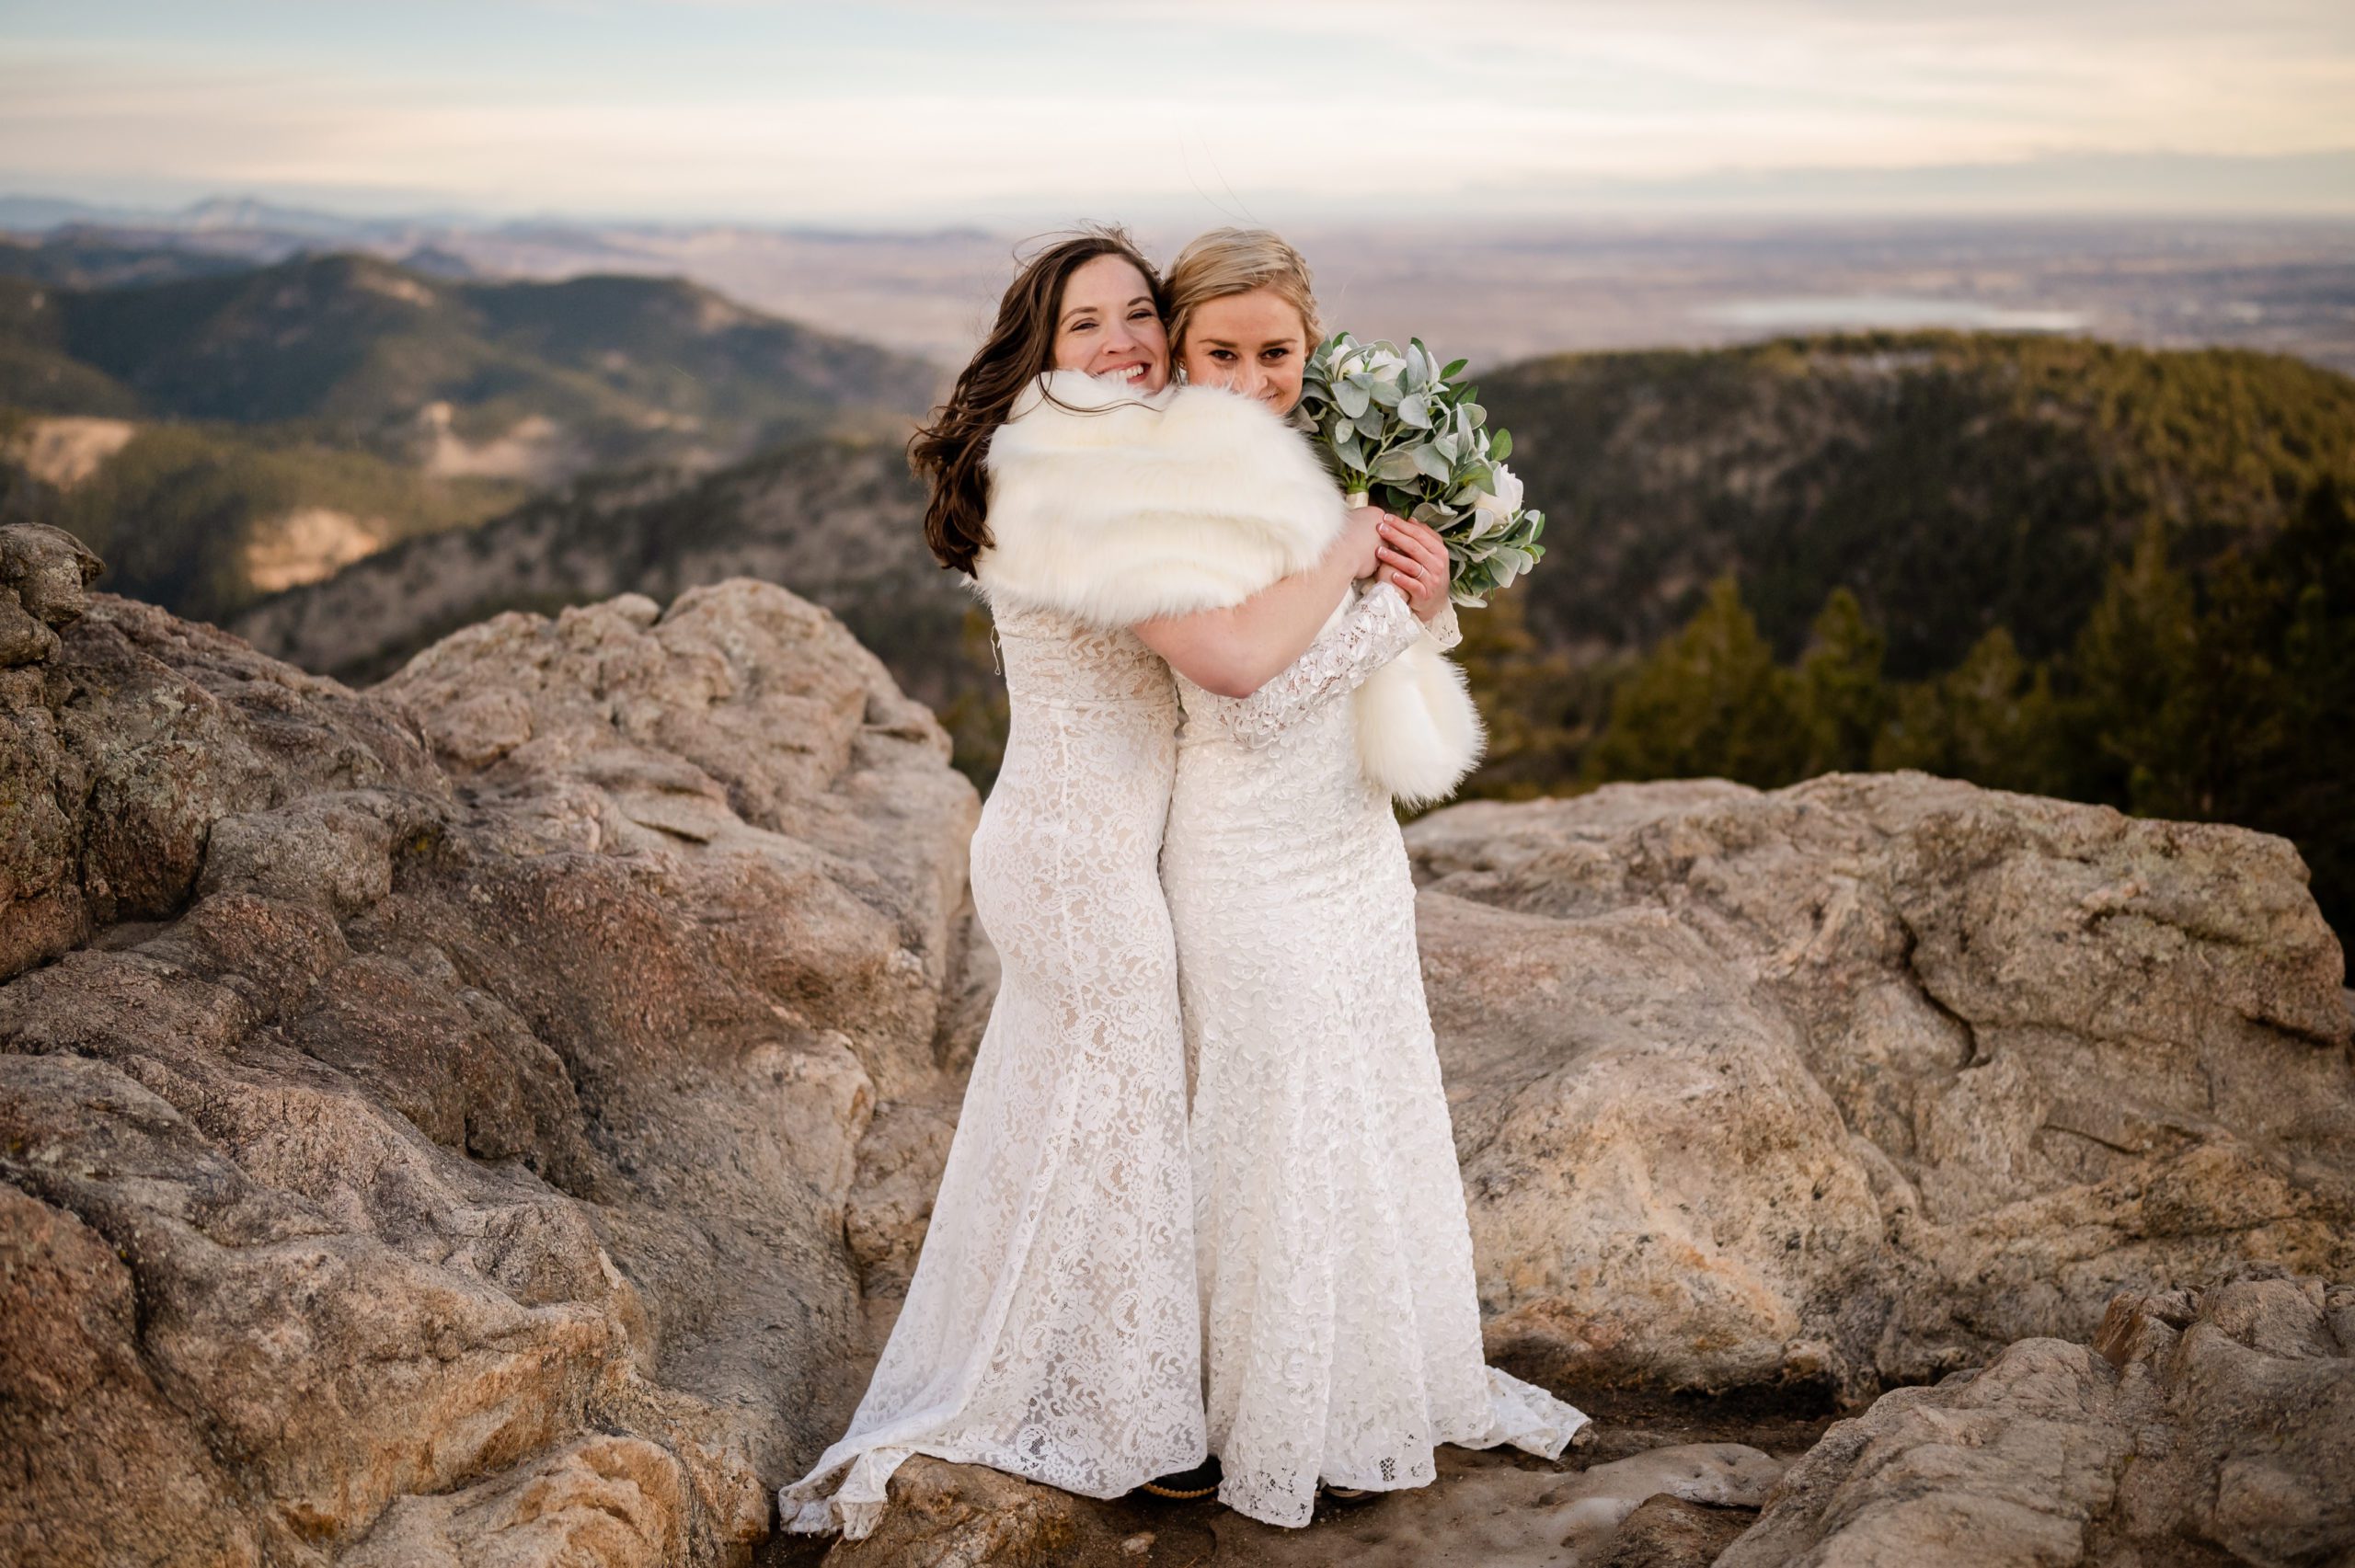 The bride being cute and posing with fur shawl at their Lost Gulch elopement. 